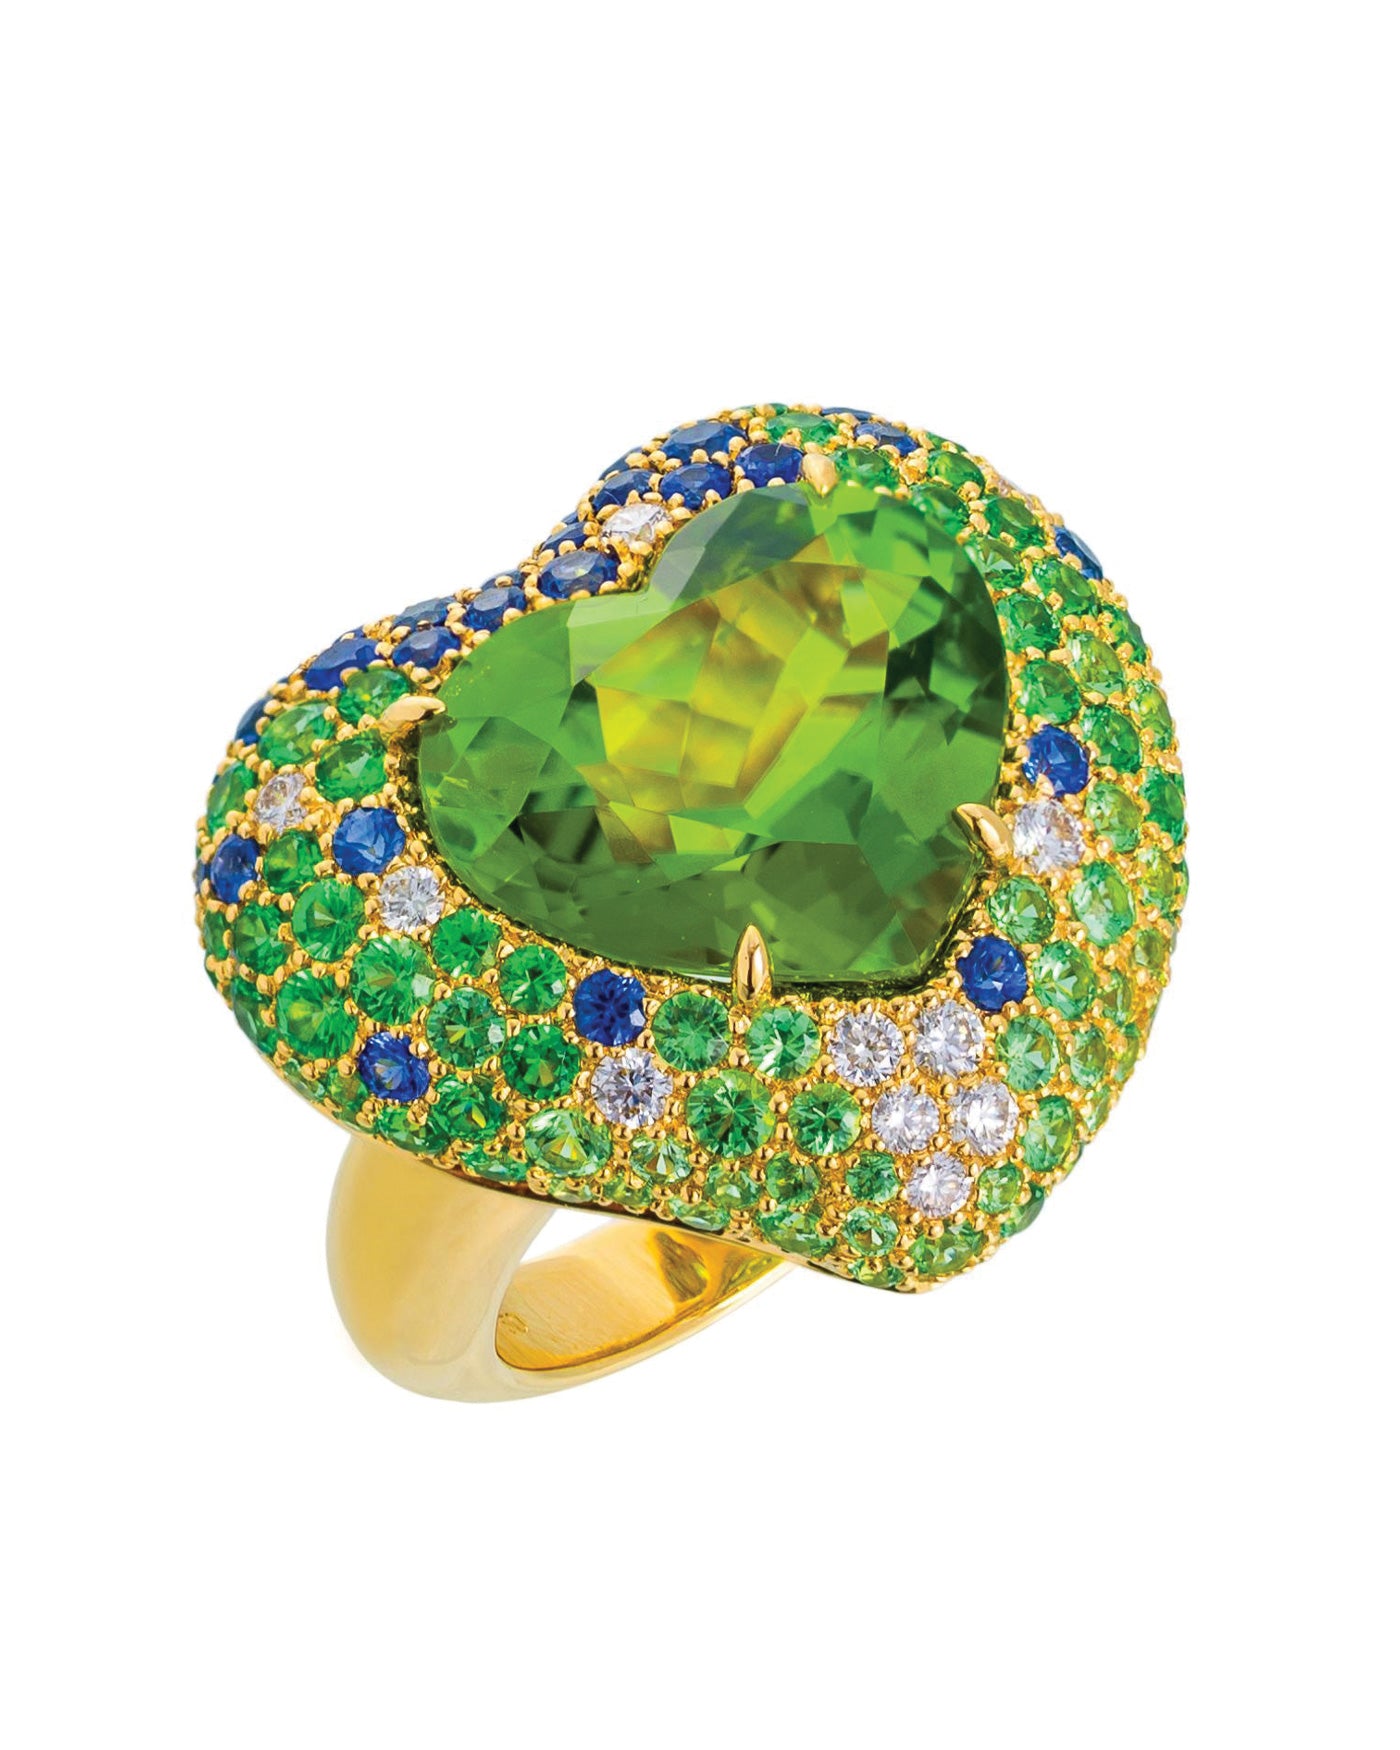 Hearts Desire Peridot Ring enhanced by a myriad of gemstones and diamonds, crafted in 18 karat yellow gold